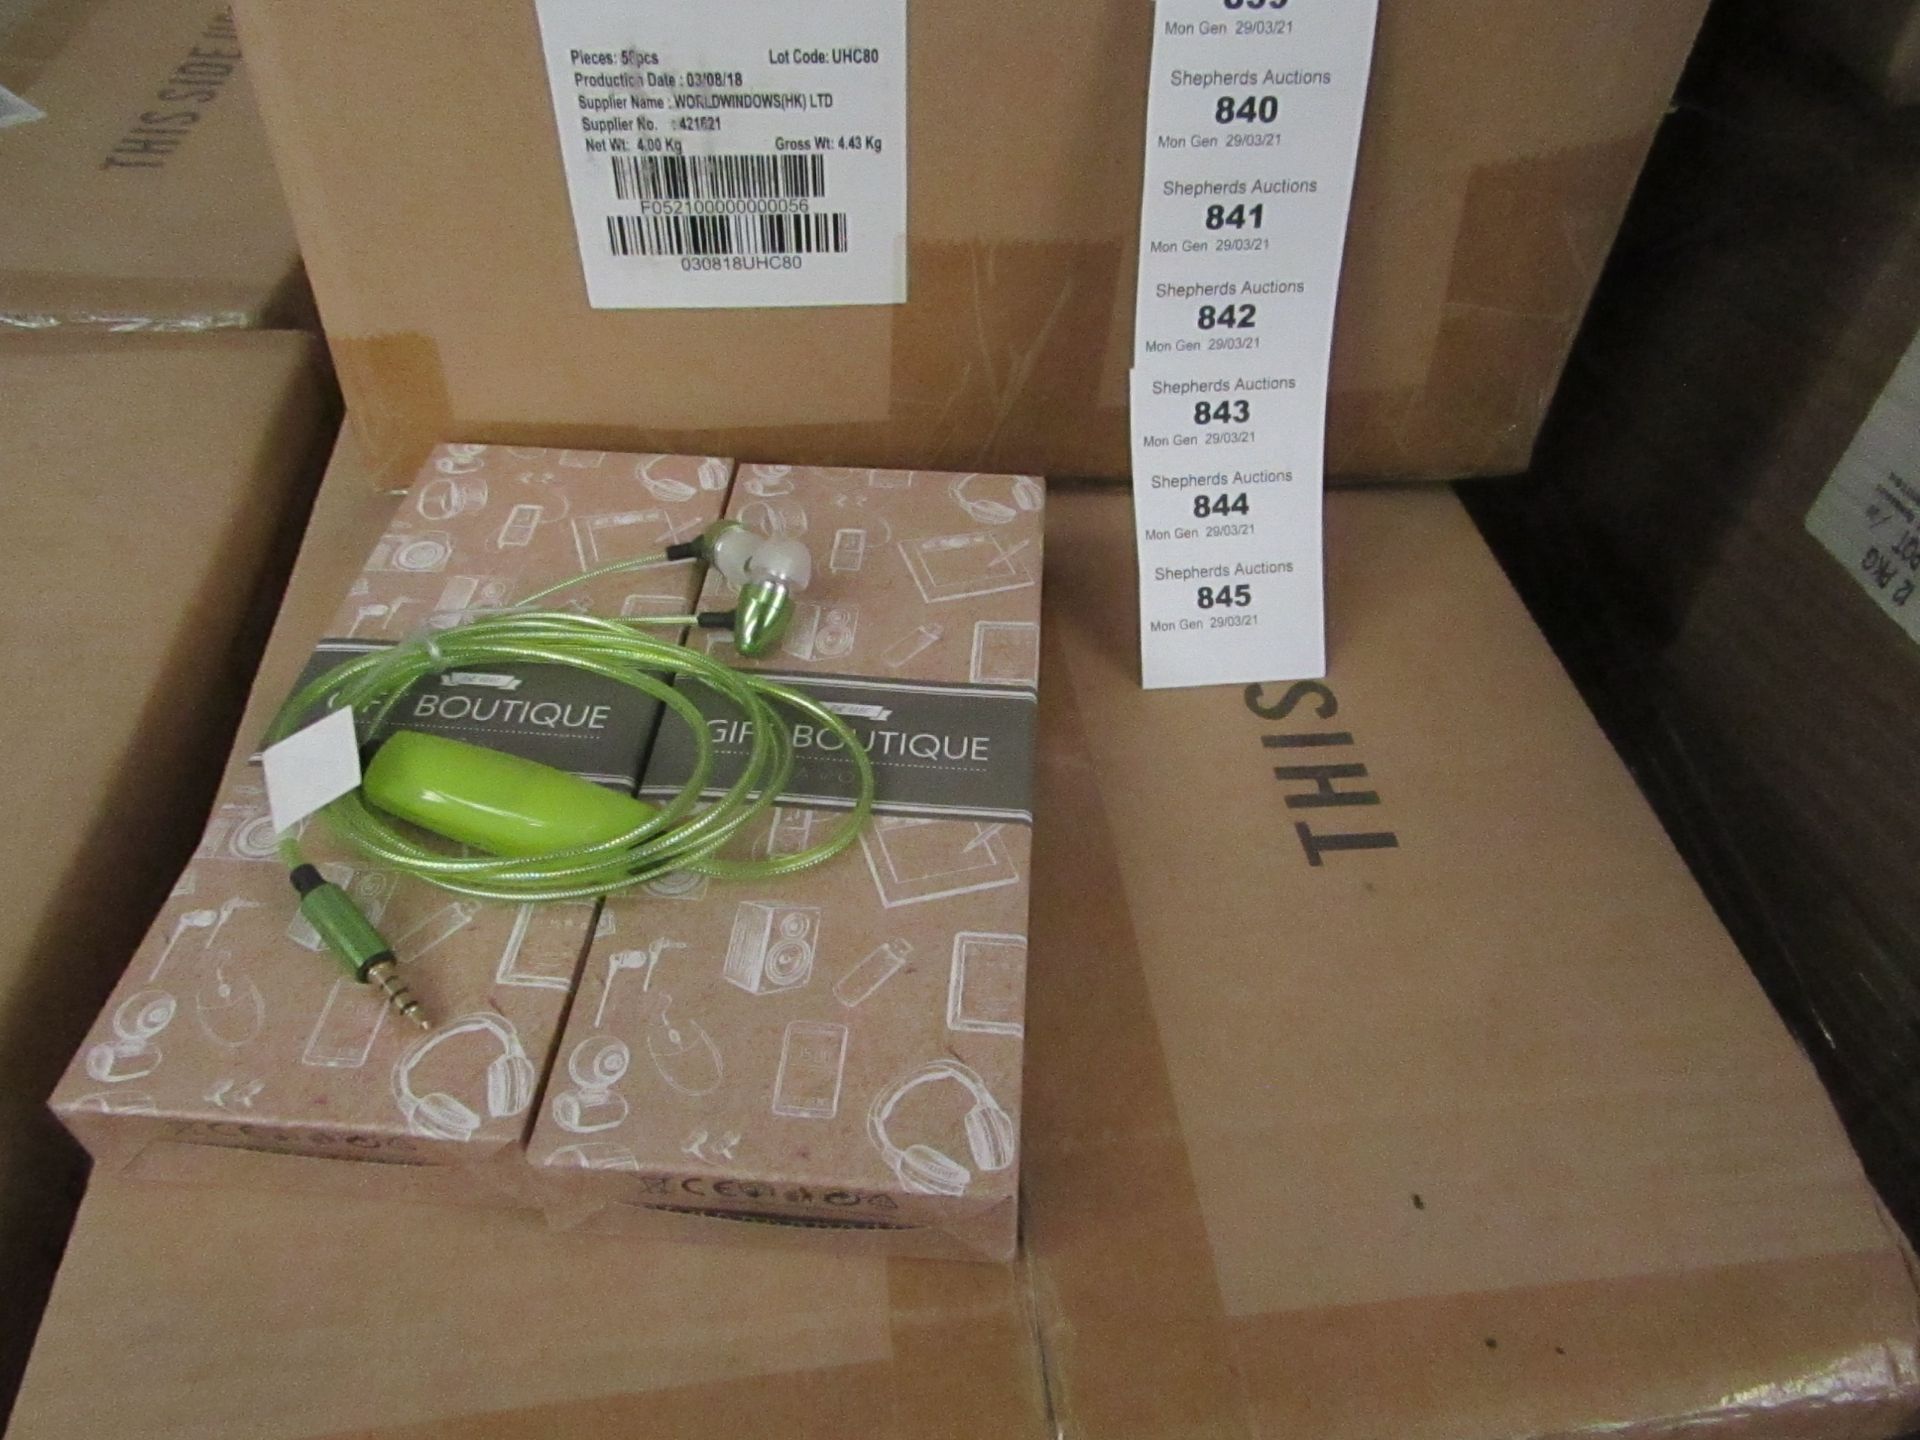 5x Avon Gift Boutique - Light up Earphones - New & Boxed. RRP £15.00 Each.